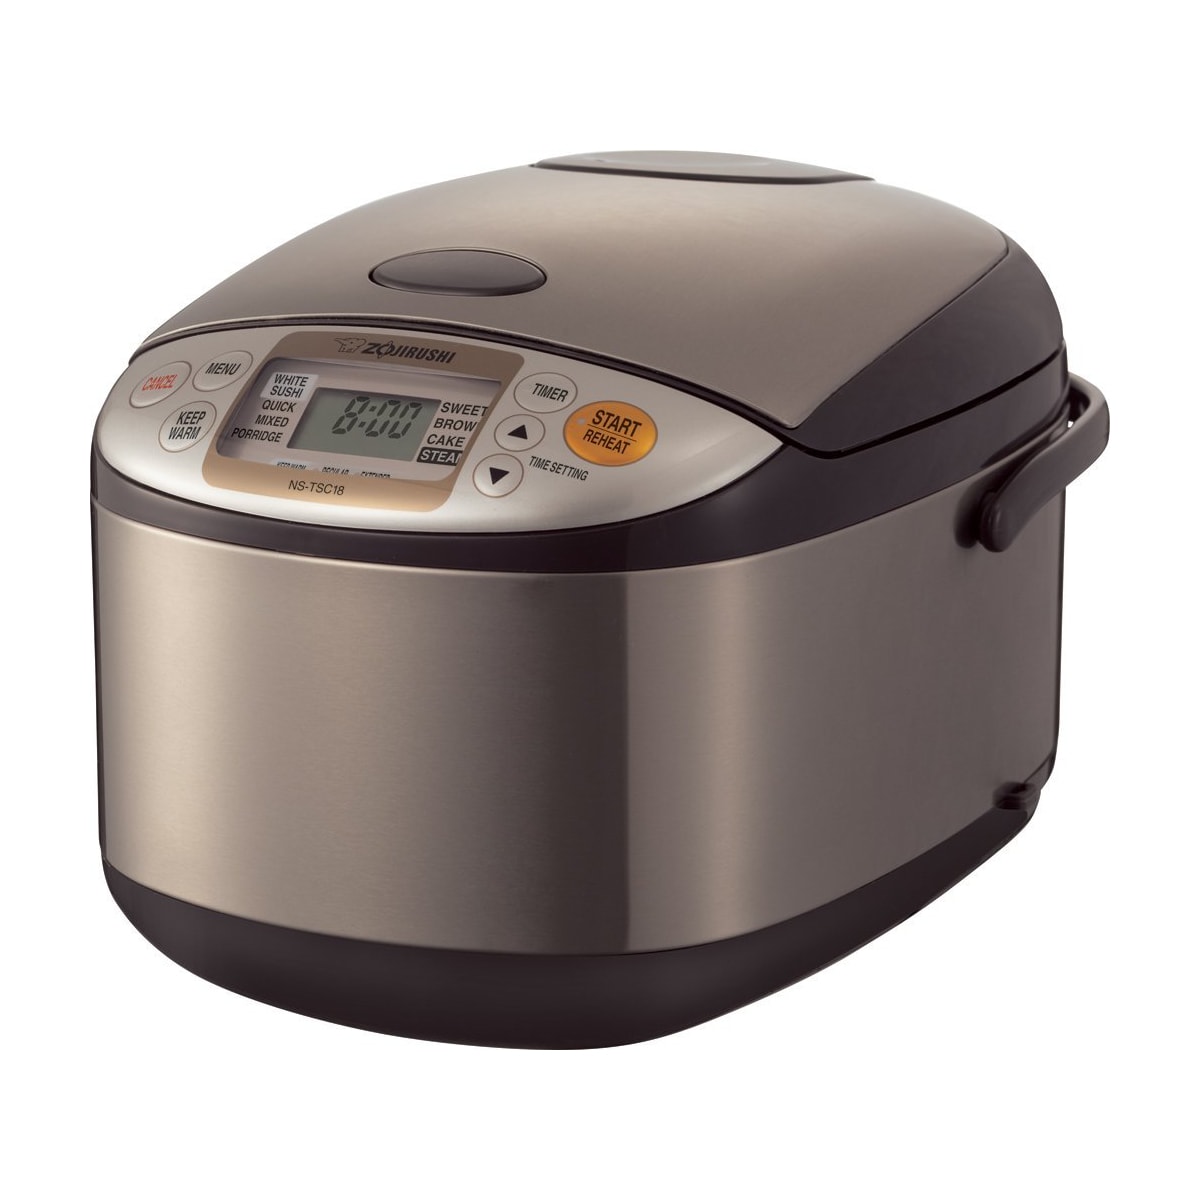 White for sale online Zojirushi 5.5 Cup Fuzzy Rice Cooker 